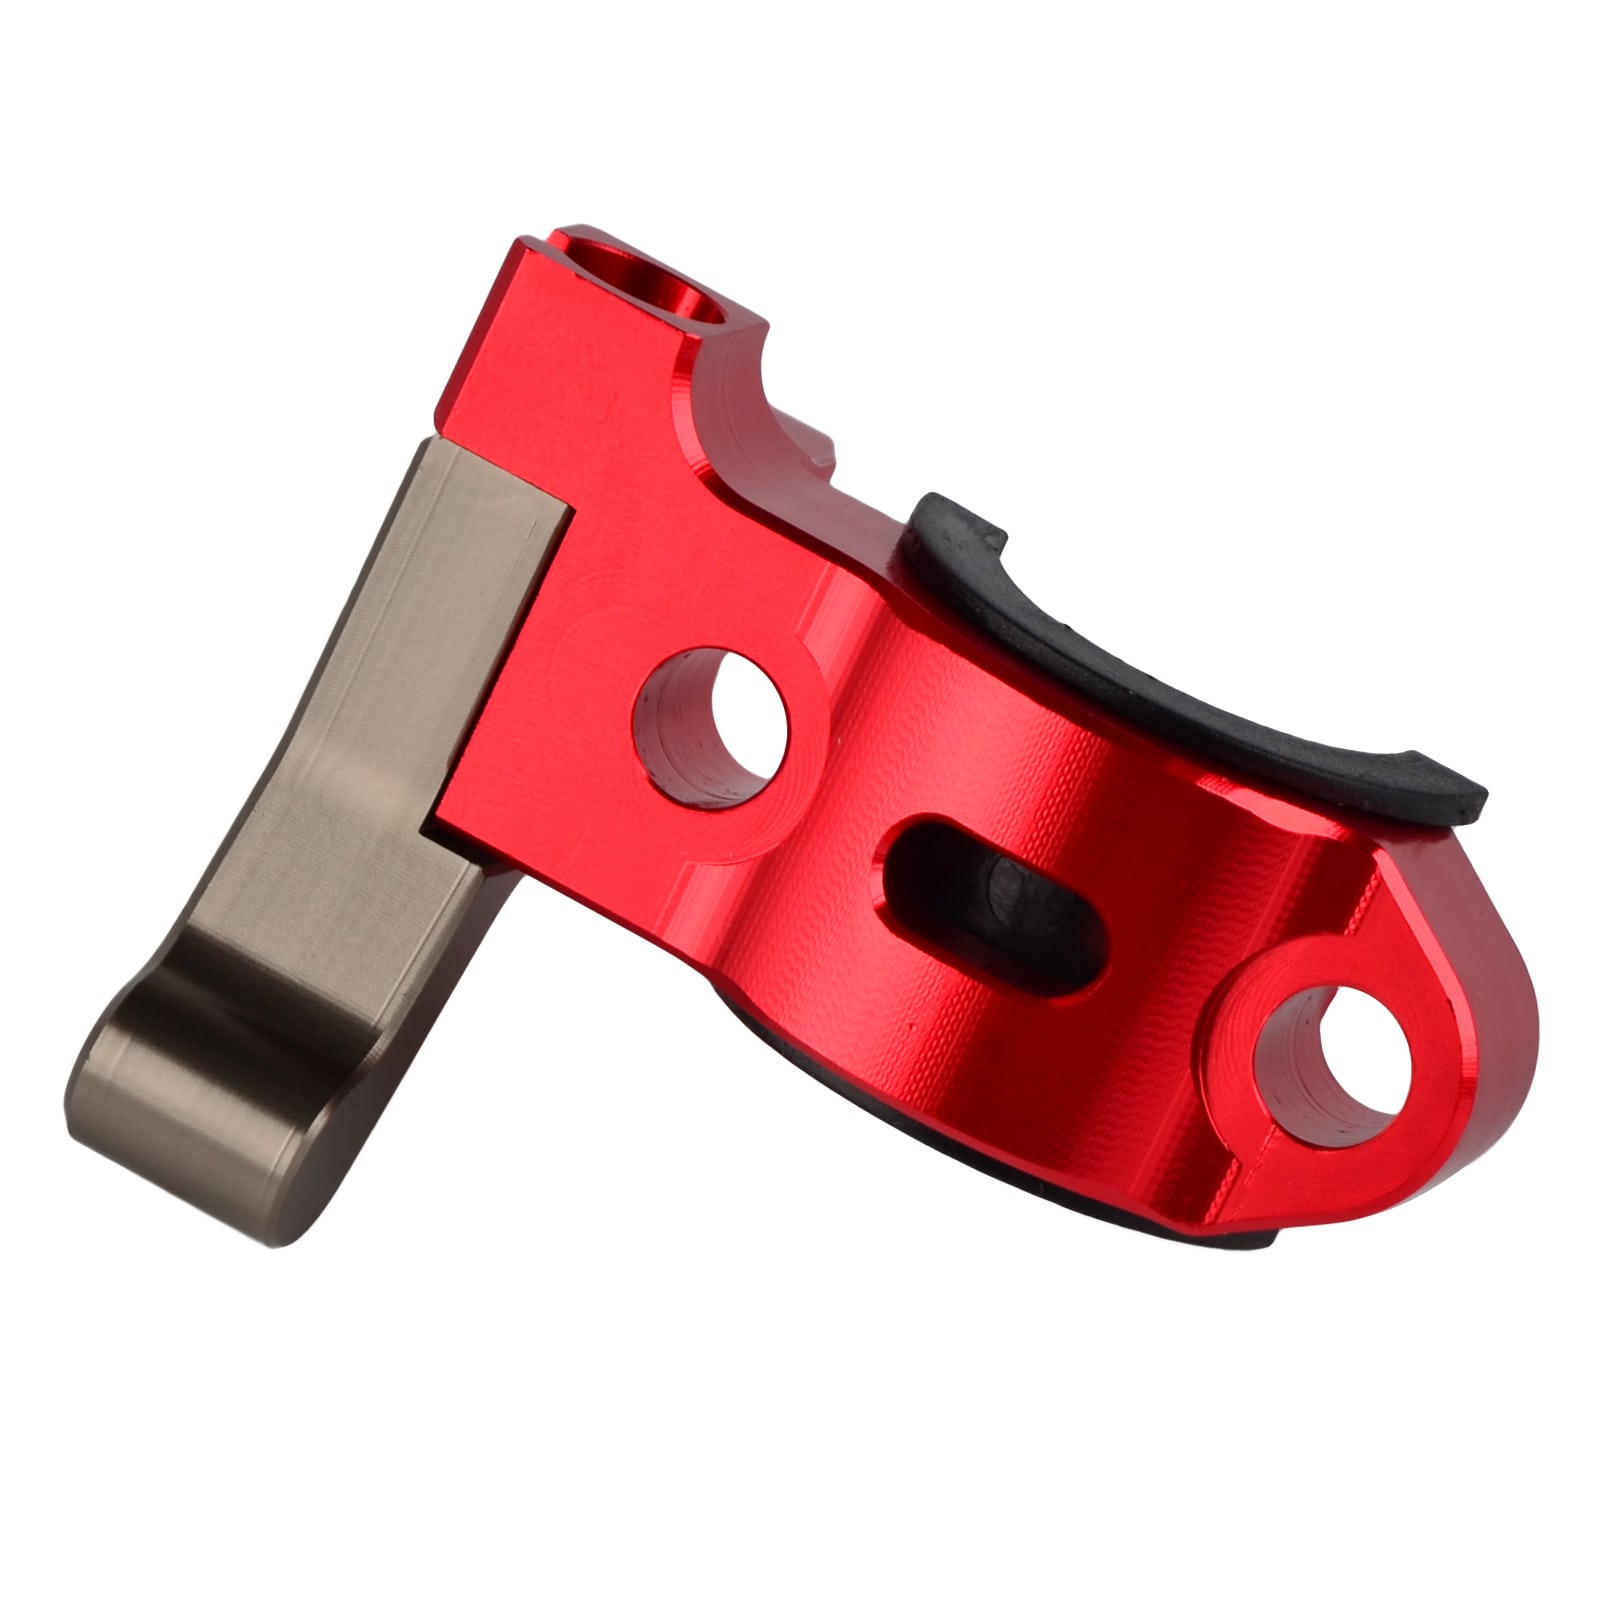 Rotating Bar Clamp Hot Start Lever For Brake and Clutch